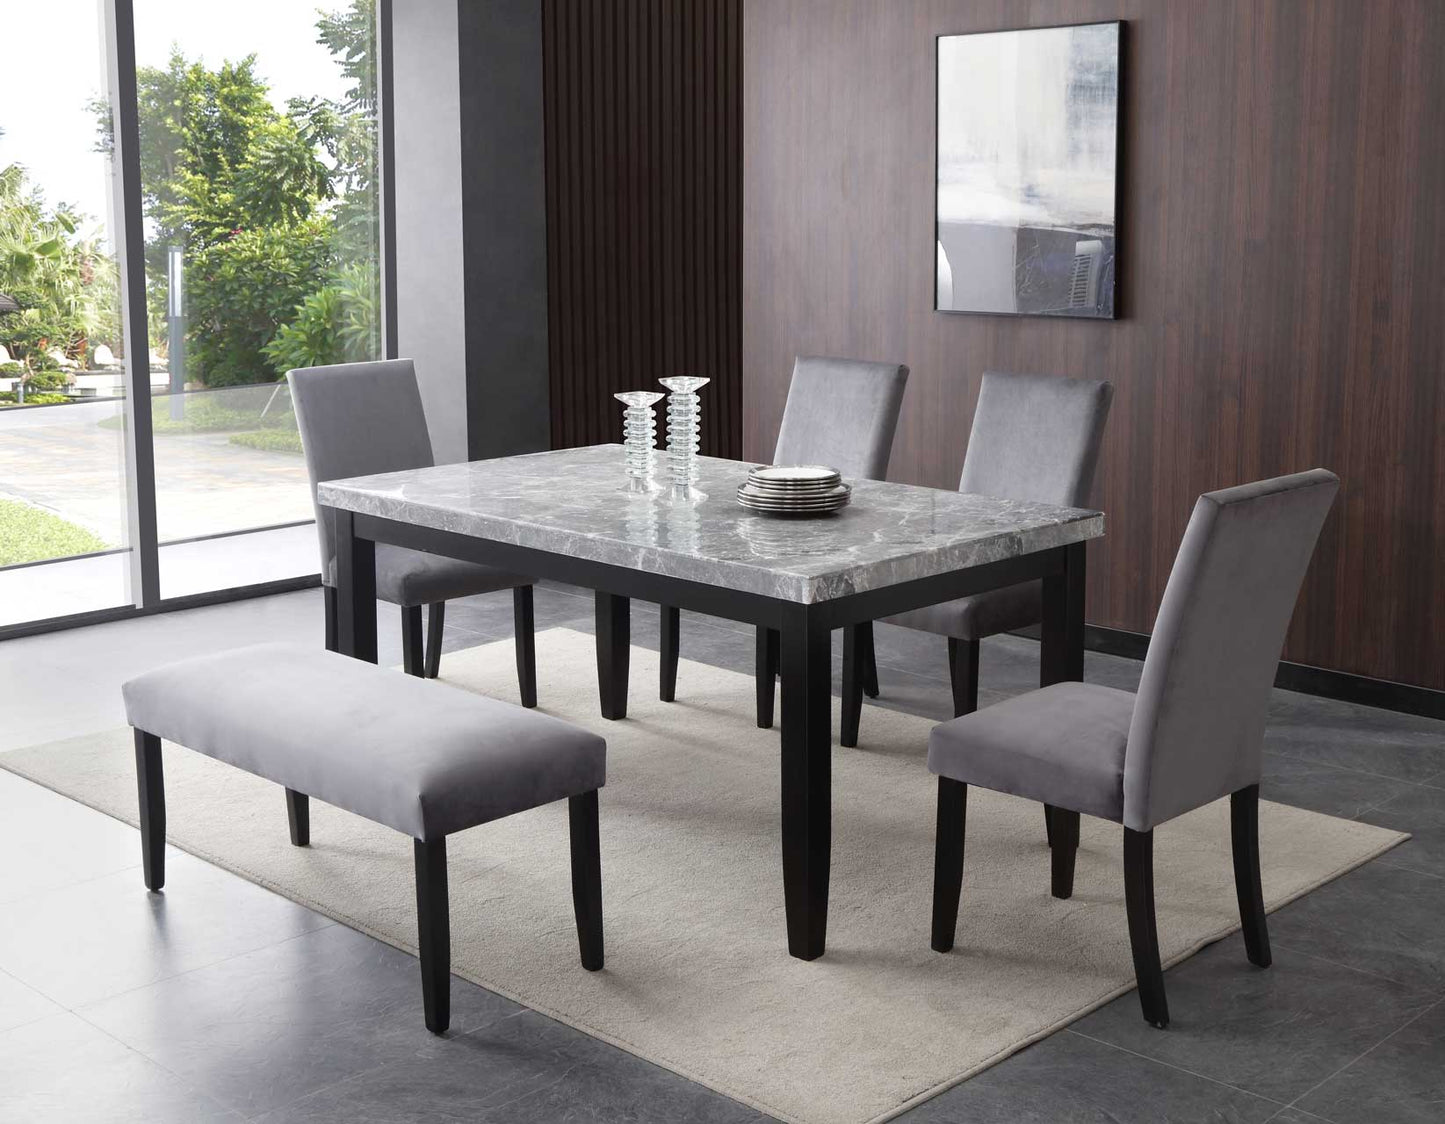 Napoli 6-Piece 64-inch Gray Marble Dining Set
(Table, Bench & 4 Side Chairs)